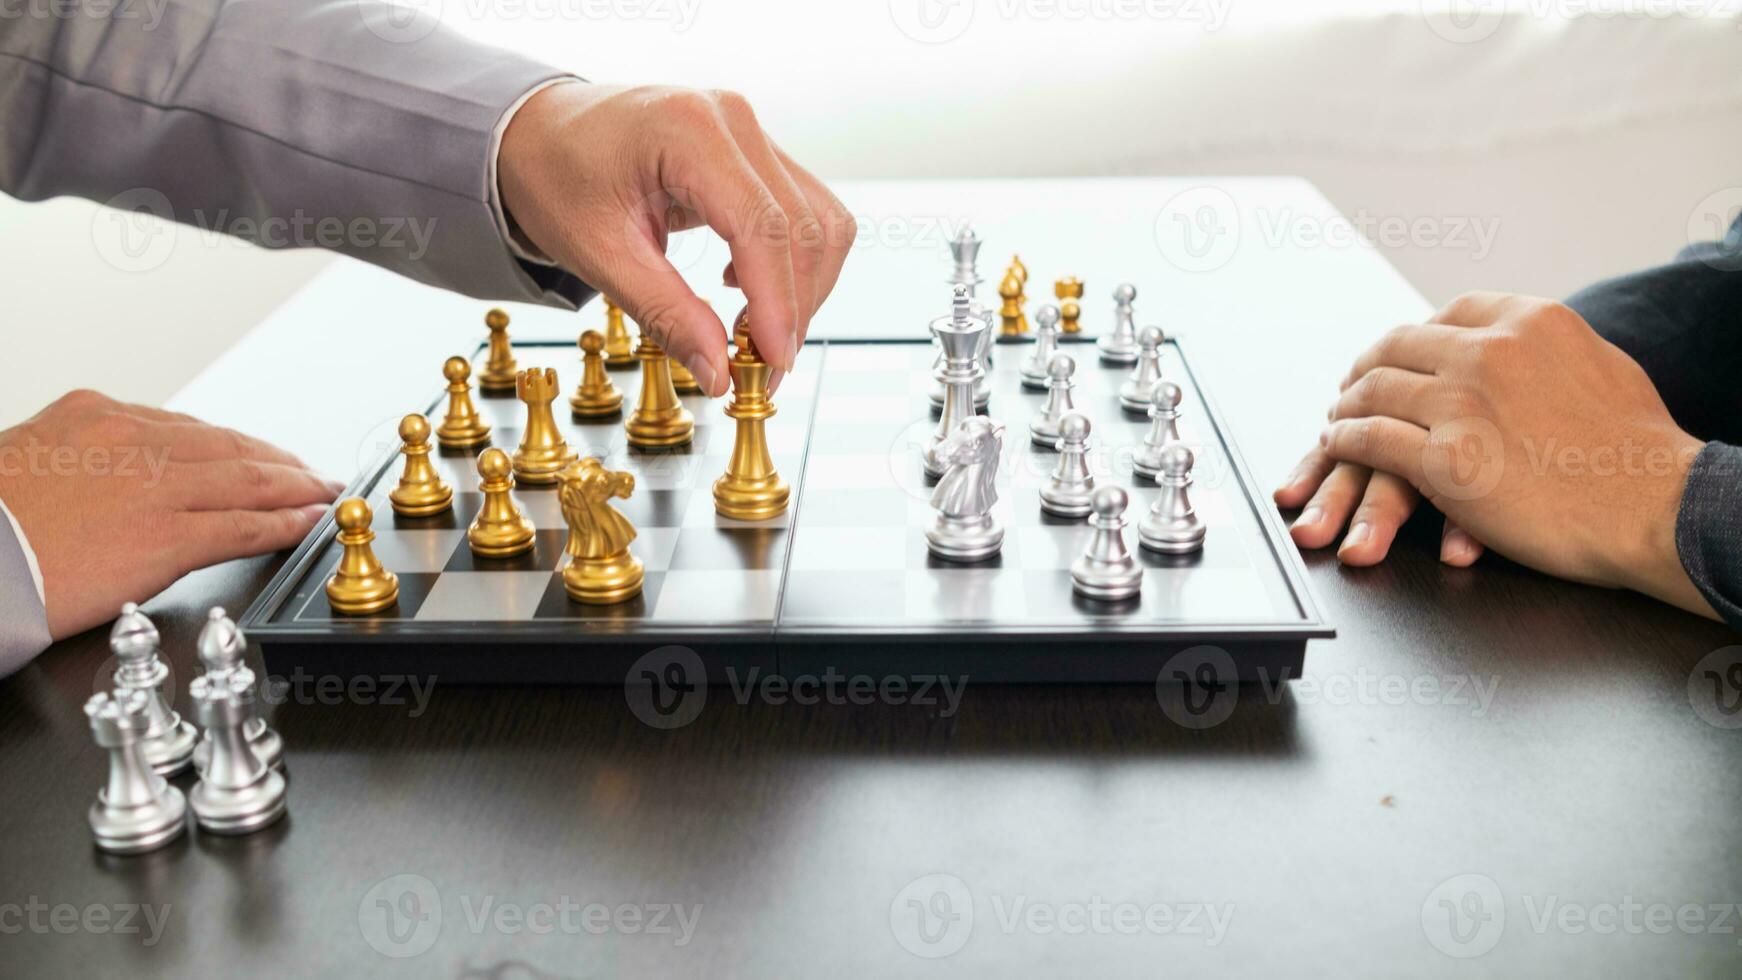 Young businessman planning winning chess move in game of chess representing successful and victorious business path. chess concept representing strategic business strategy to achieve victory. photo